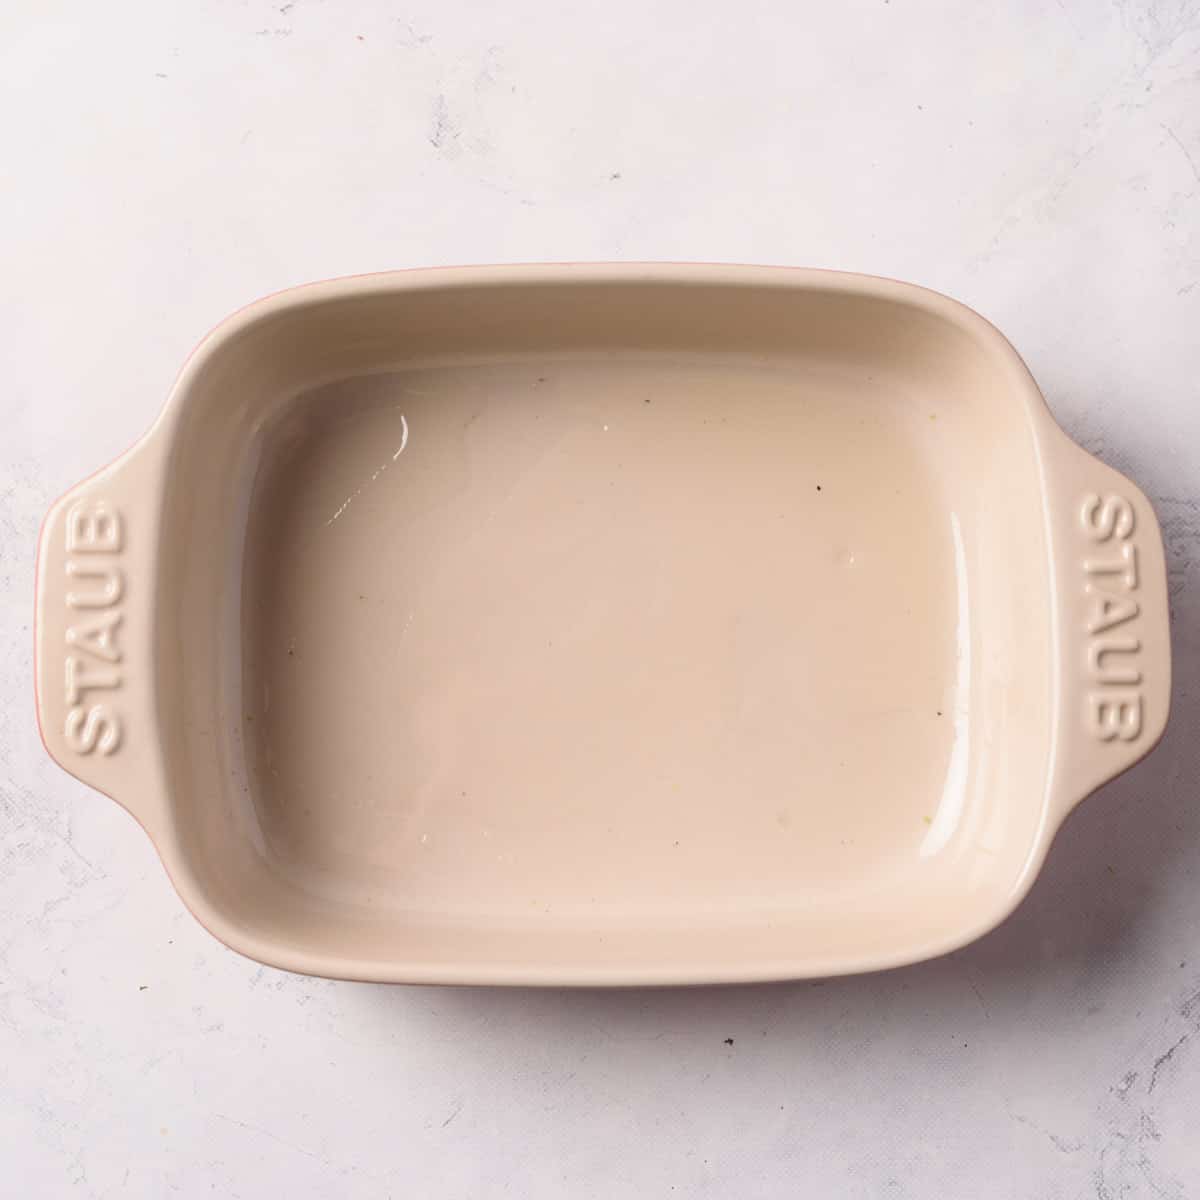 Small Staub baking dish coated with oil.